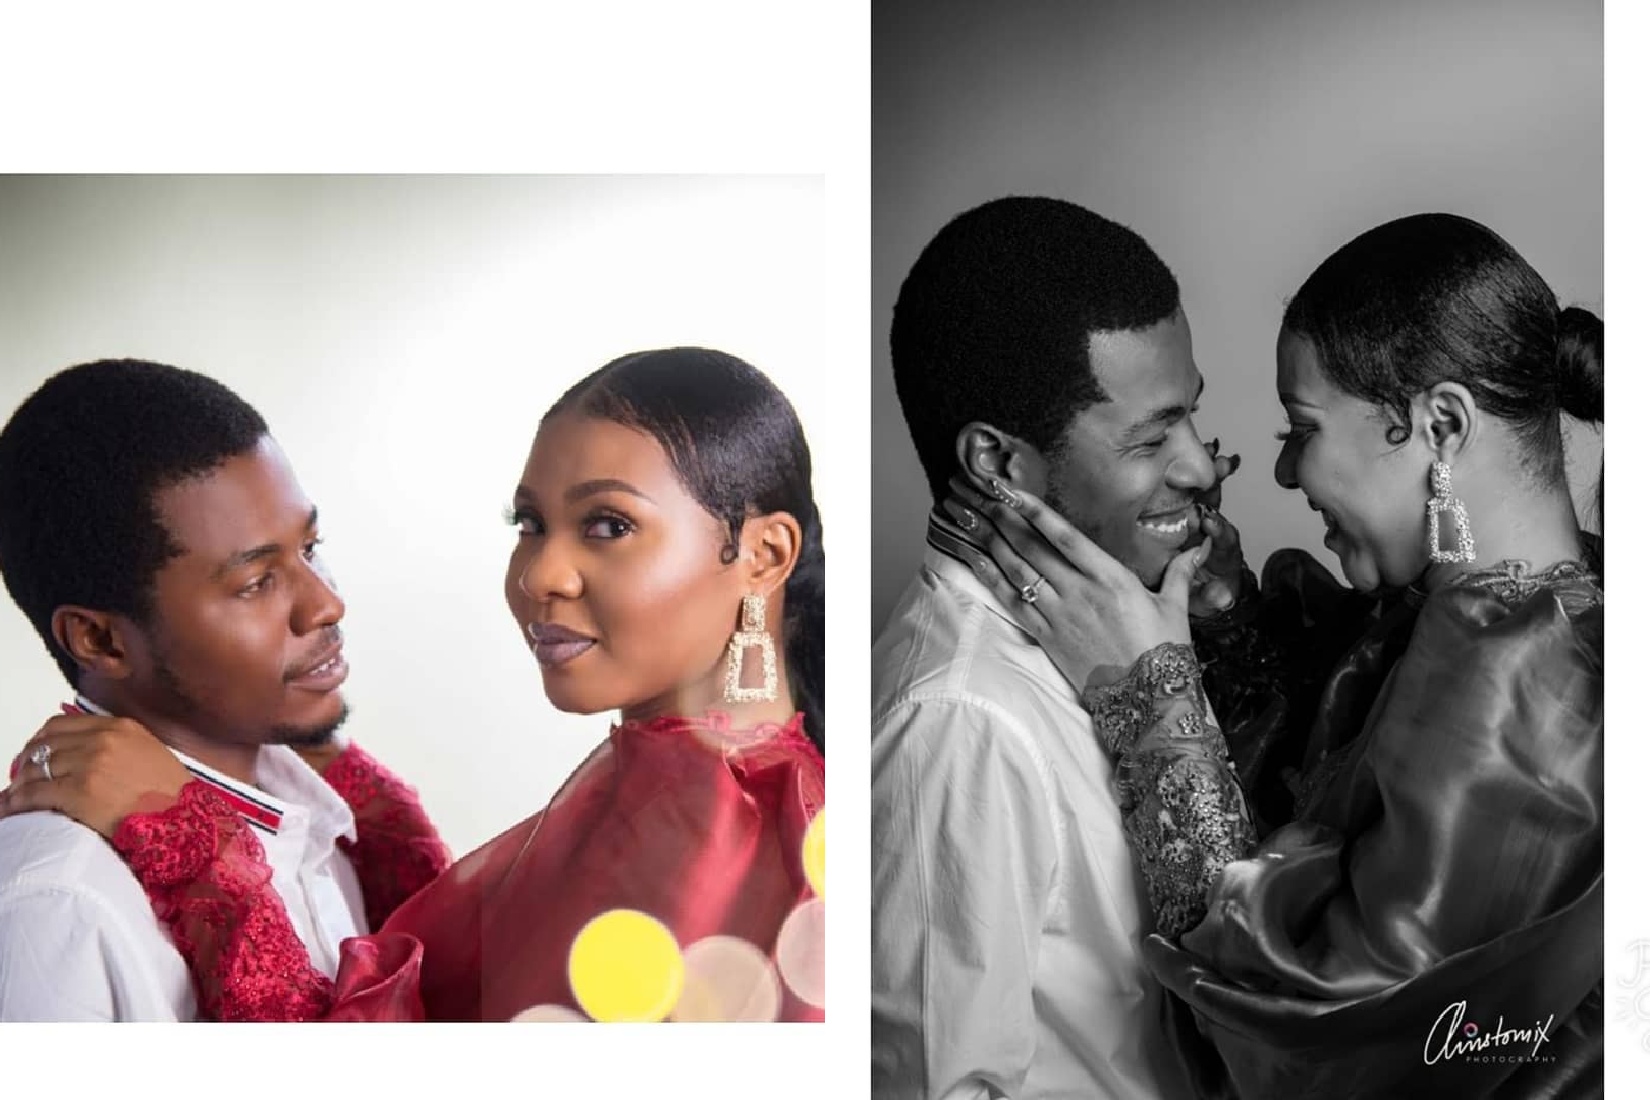 Actor Samuel Ajibola Aka Spiff And His Girlfriend Sandra Are Engaged